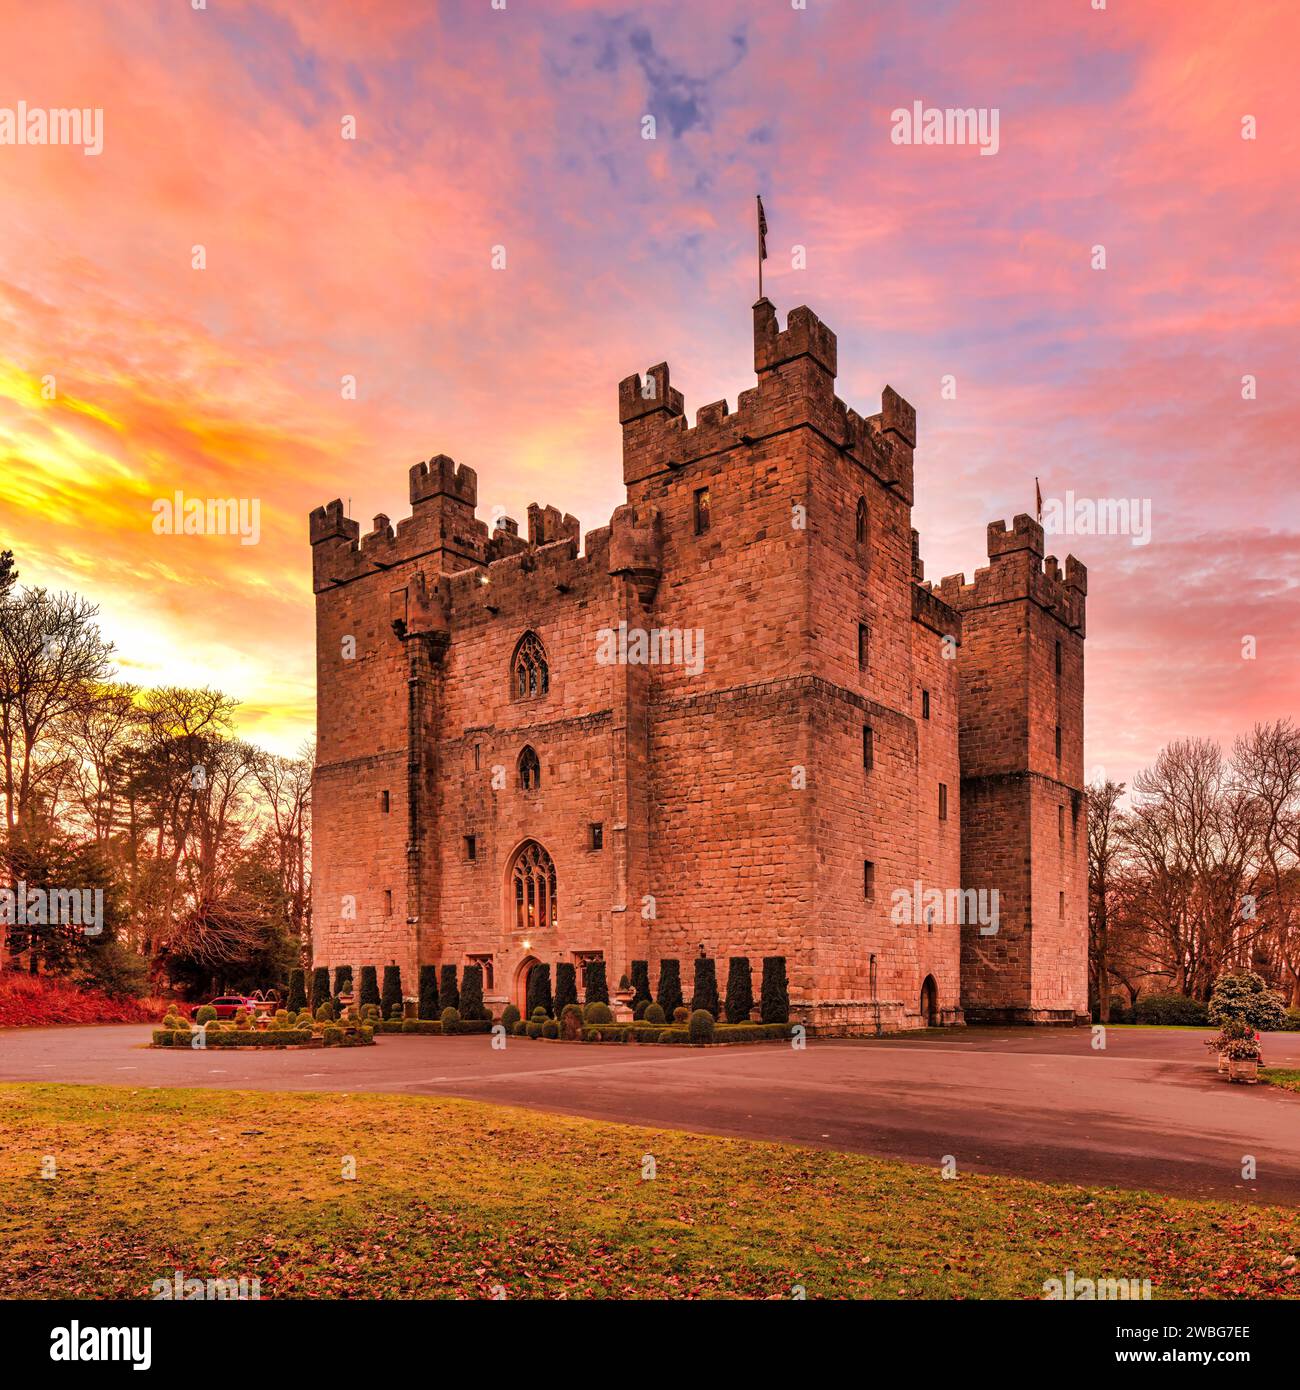 An external daylight view in summer at sunset of Langley Castle Hotel near Haydon Bridge in Northumberland with a lovely colourful sky backdrop Stock Photo